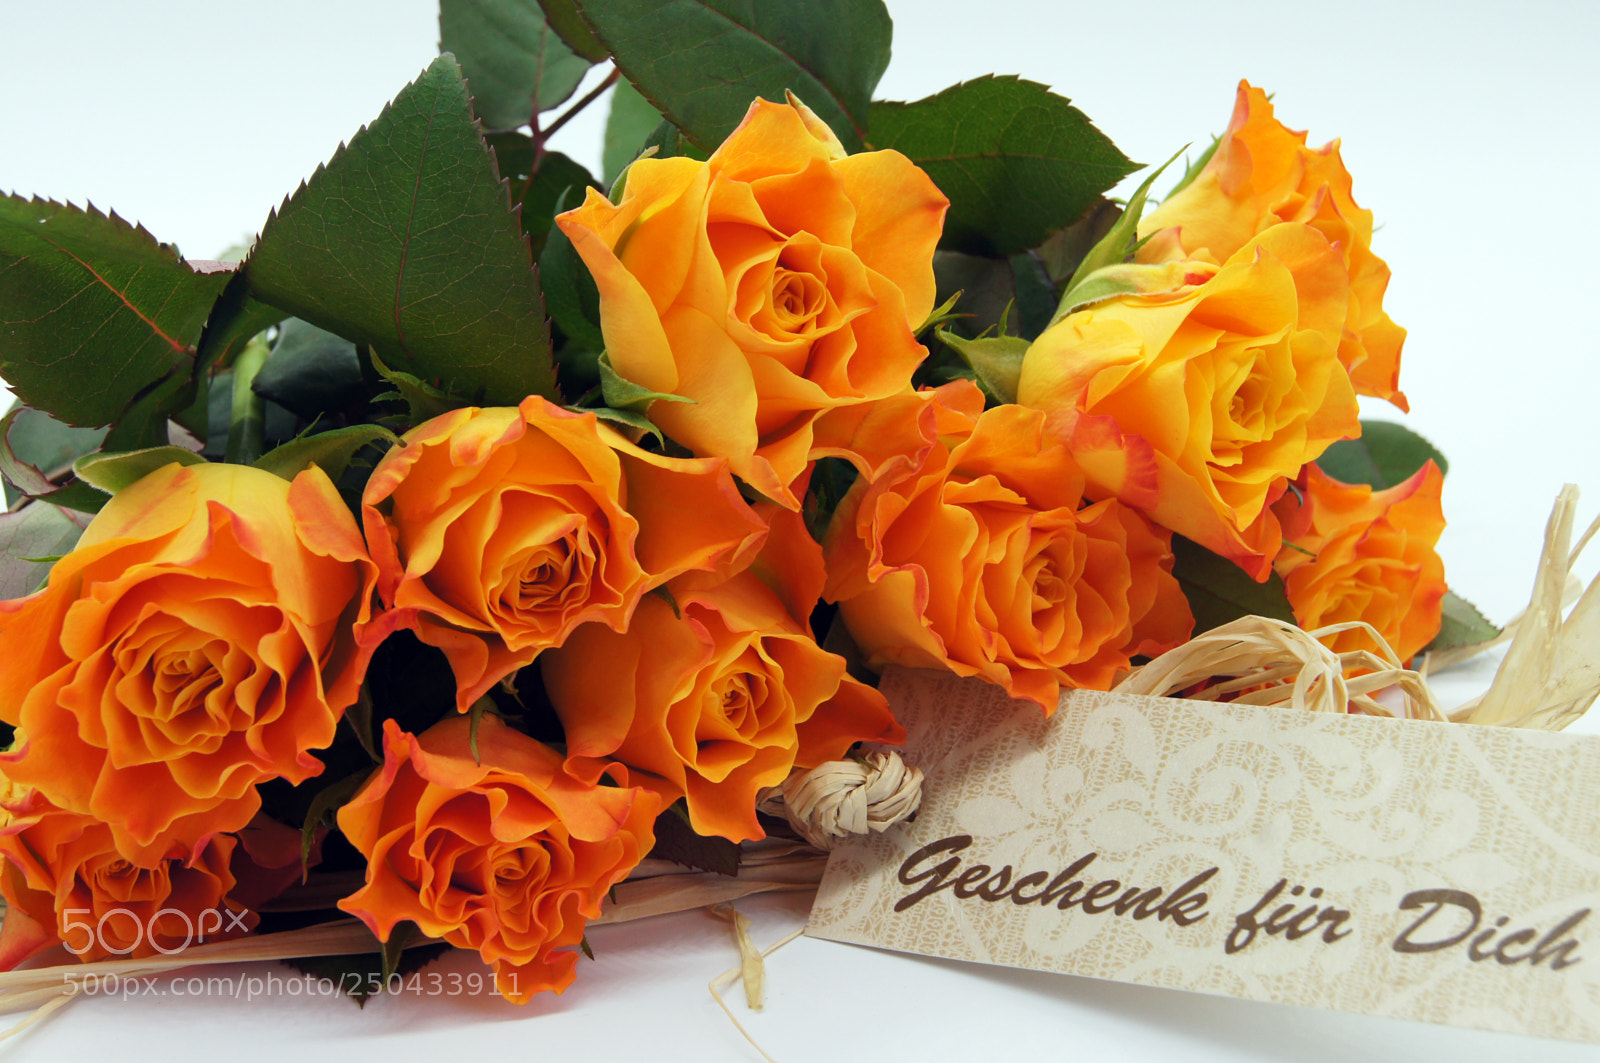 Sony SLT-A55 (SLT-A55V) sample photo. Salmon-colored roses released on photography